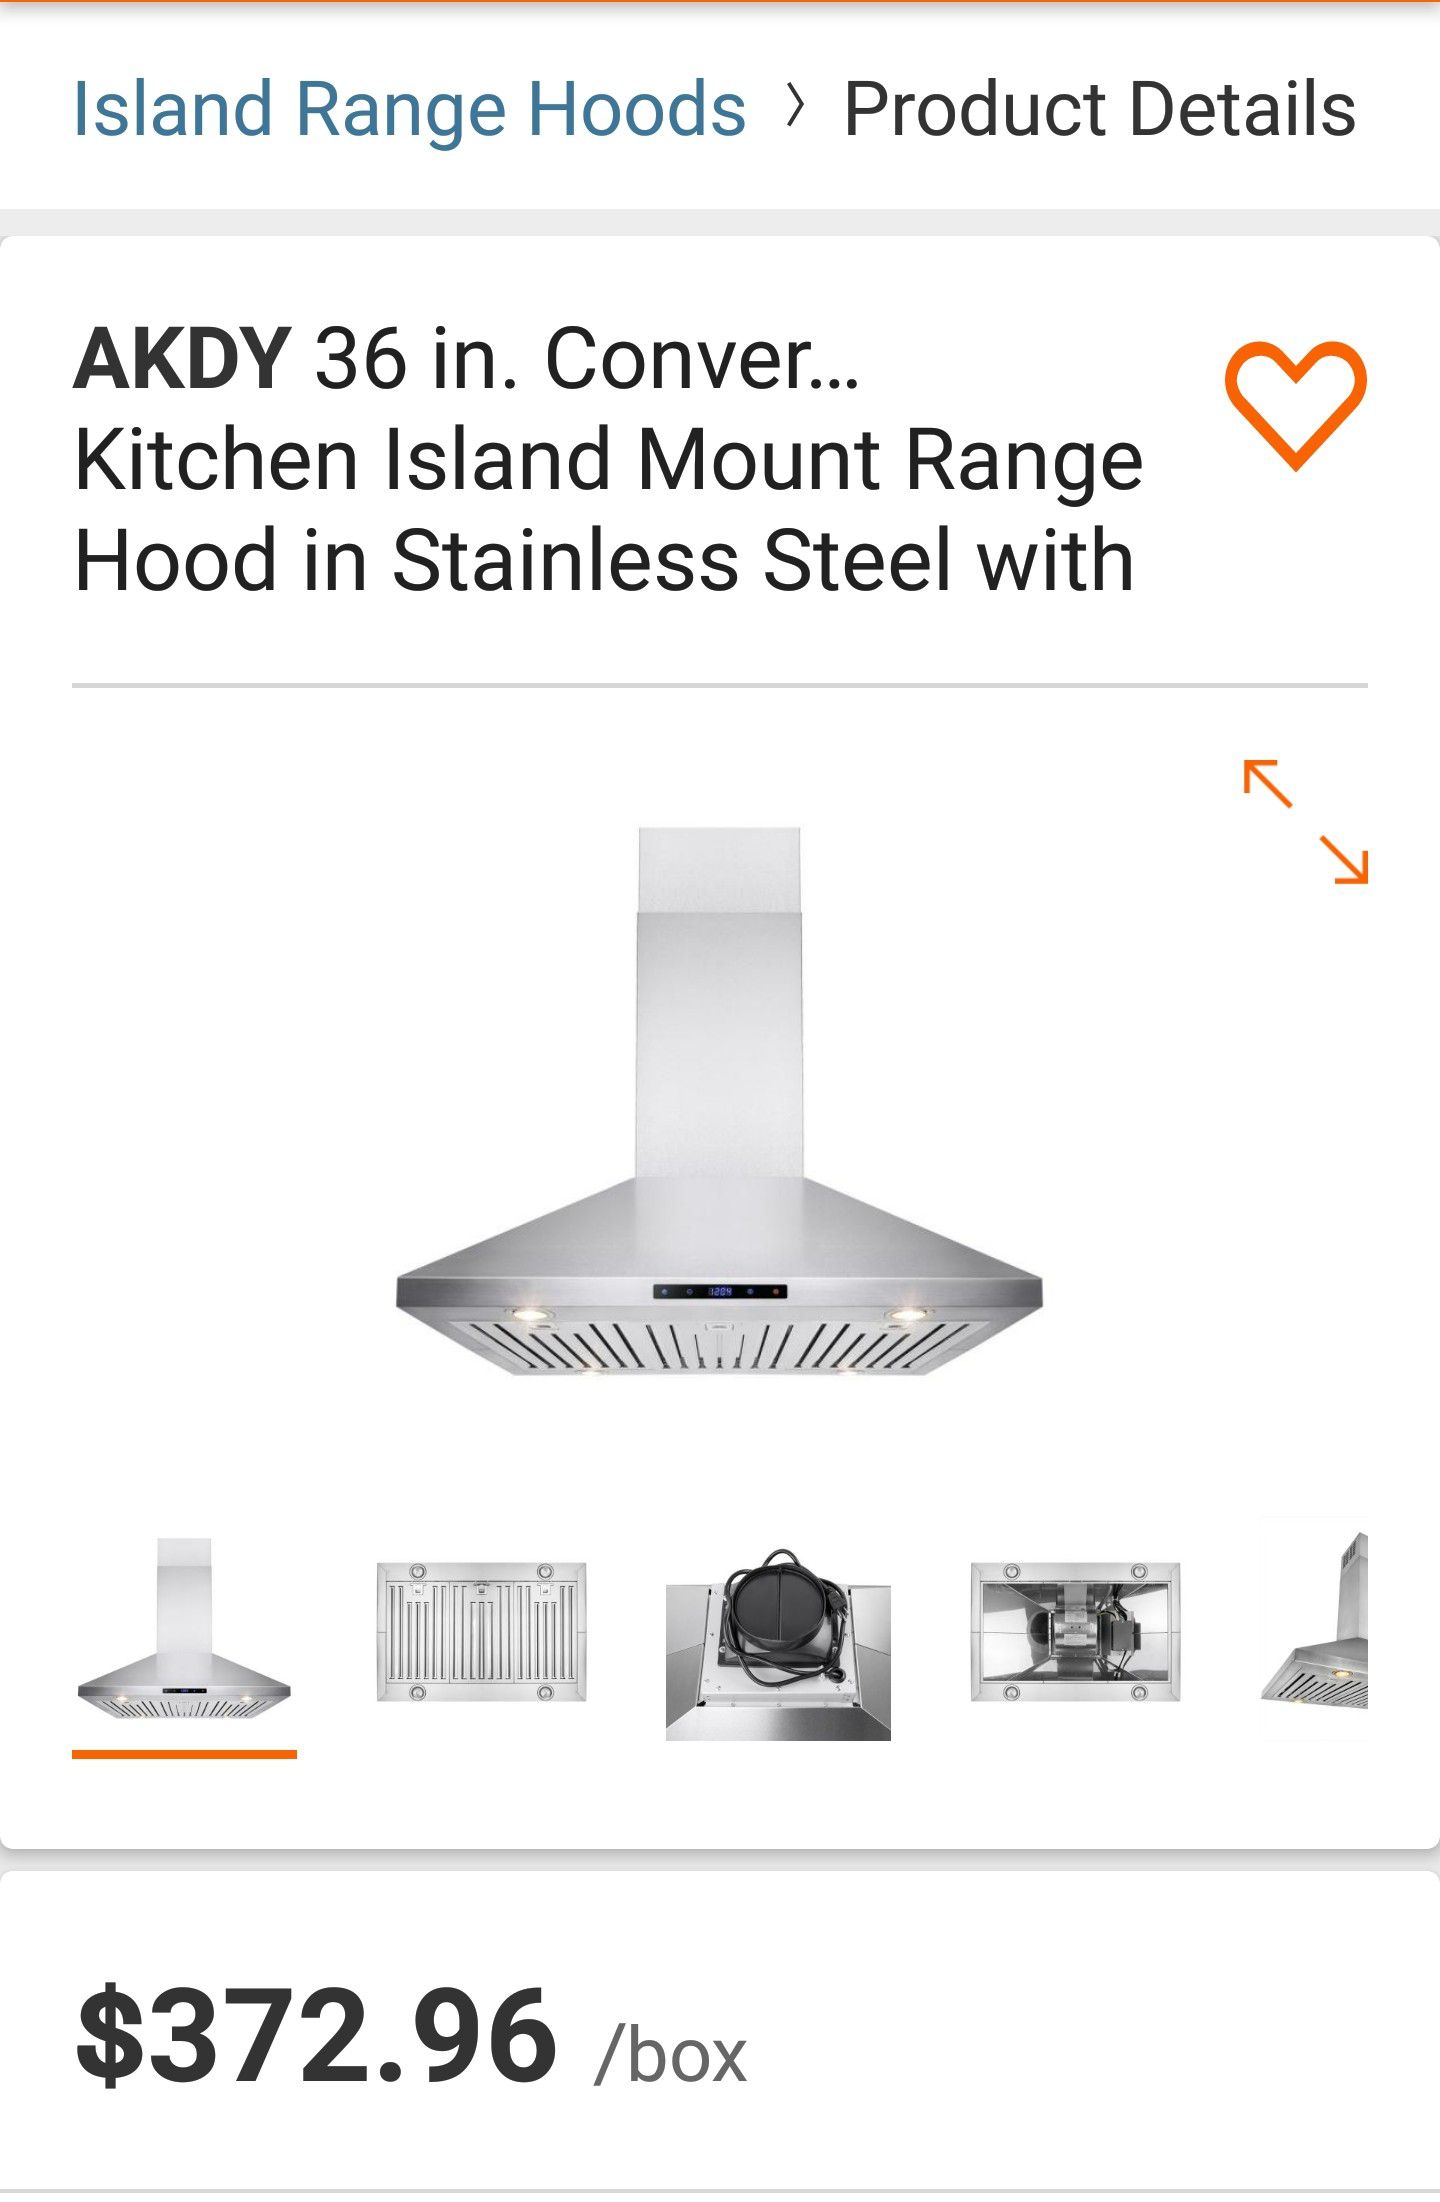 Convertible Kitchen Island Mount Range Hood in Stainless Steel with Touch Control